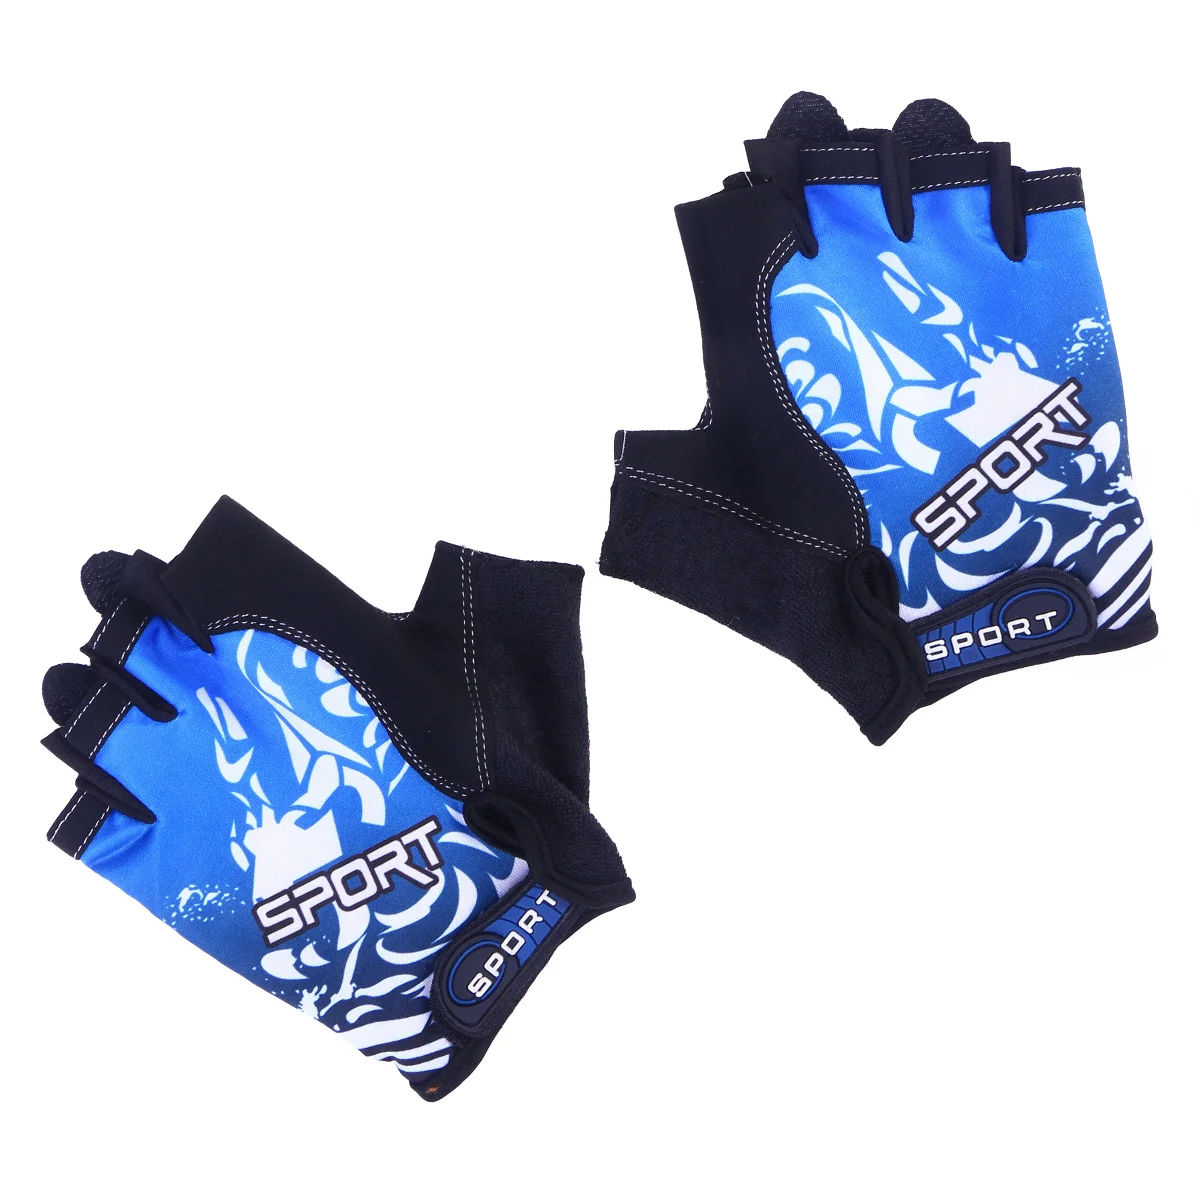 1 Pair Outdoor Sports Half Finger Gloves Non-Slip Breathable Workout Gloves for Cycling Climbing Fishing Riding Size M (Blue) mountain road bike riding gloves half finger reflective outdoor riding shock absorption unisex breathable non slip